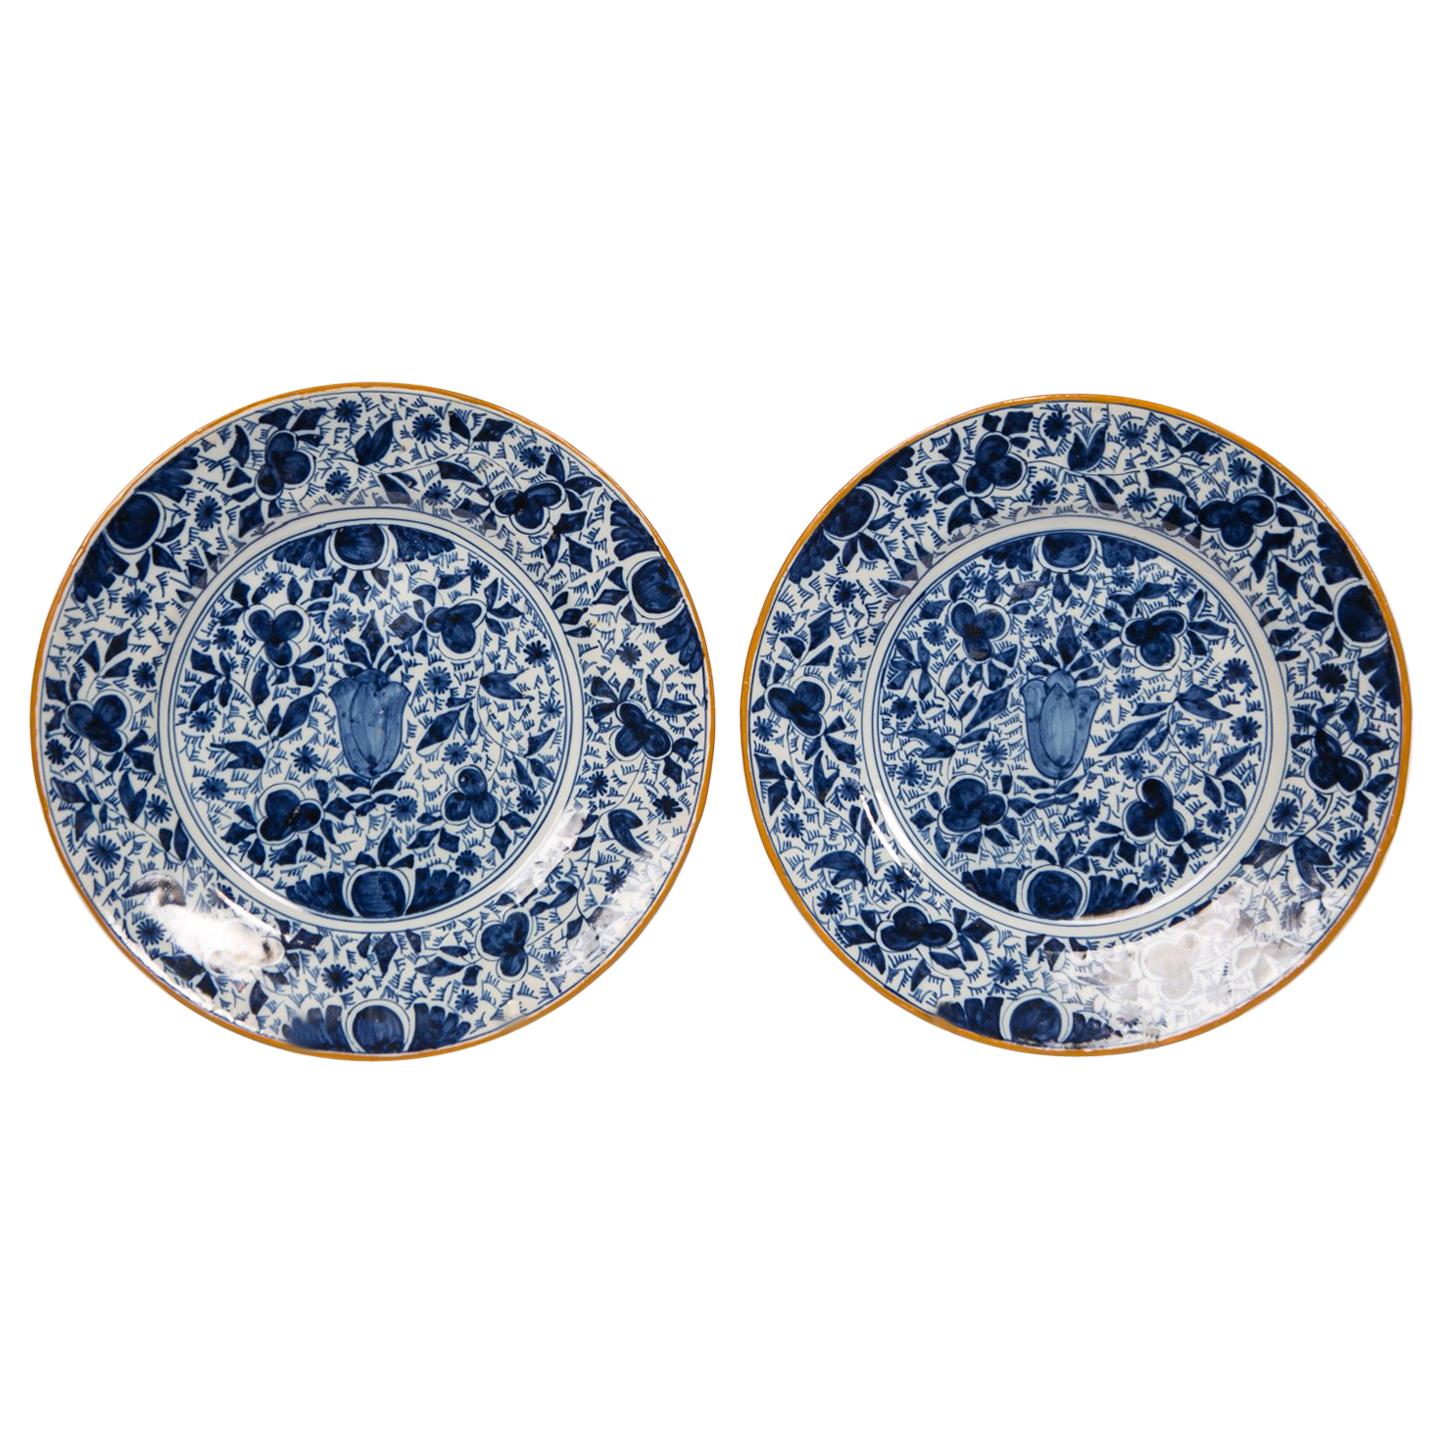 Pair of Antique Blue and White Delft Plates Made in the 18th Century